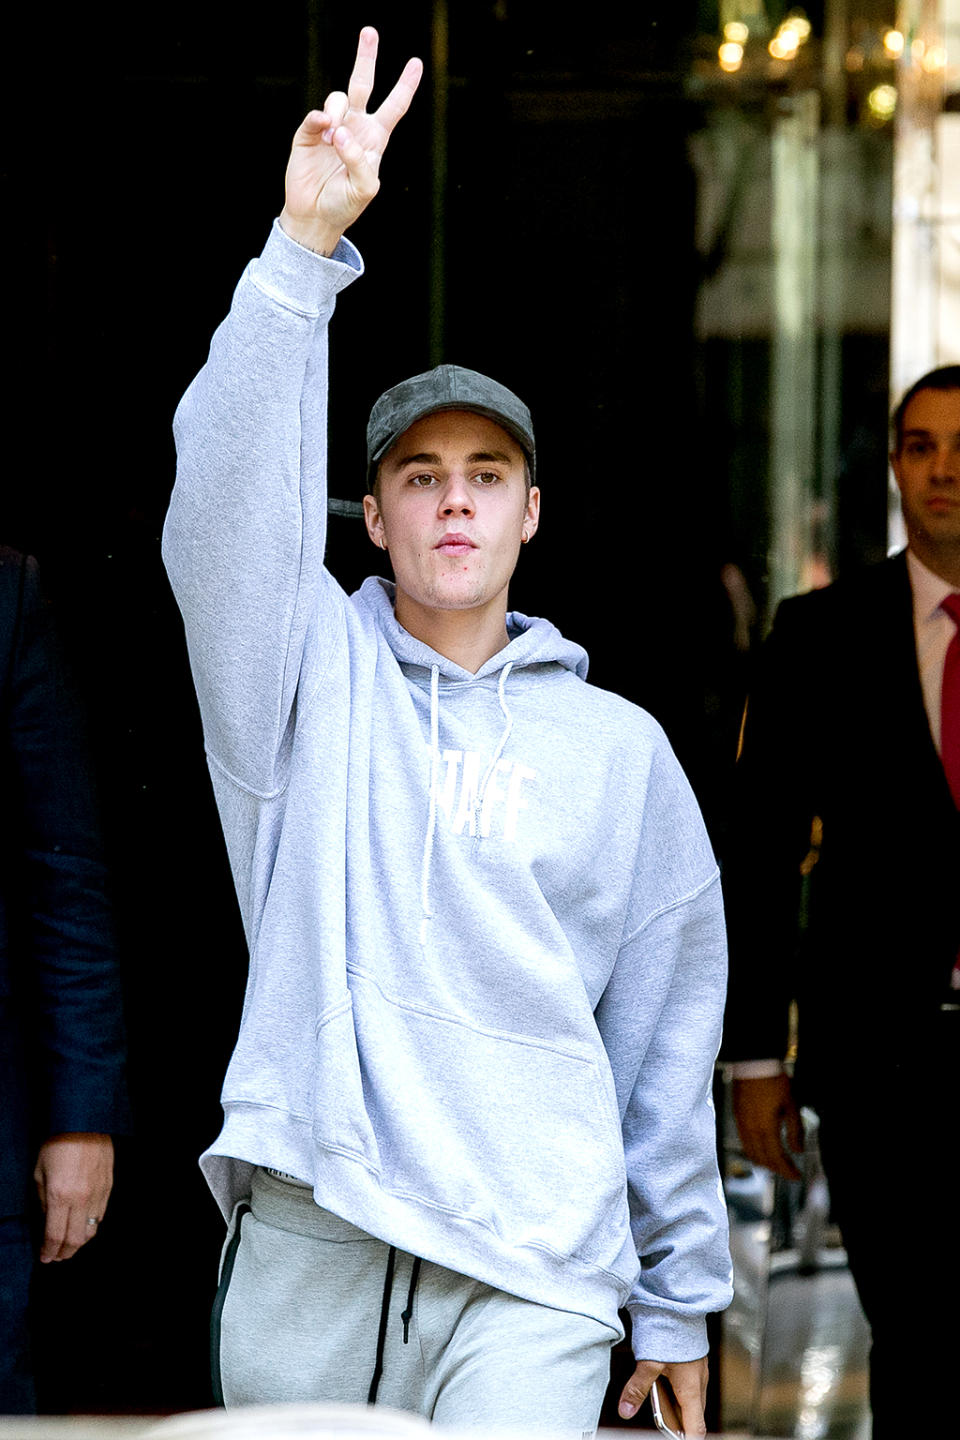 Justin Bieber: I will be nicer to fans